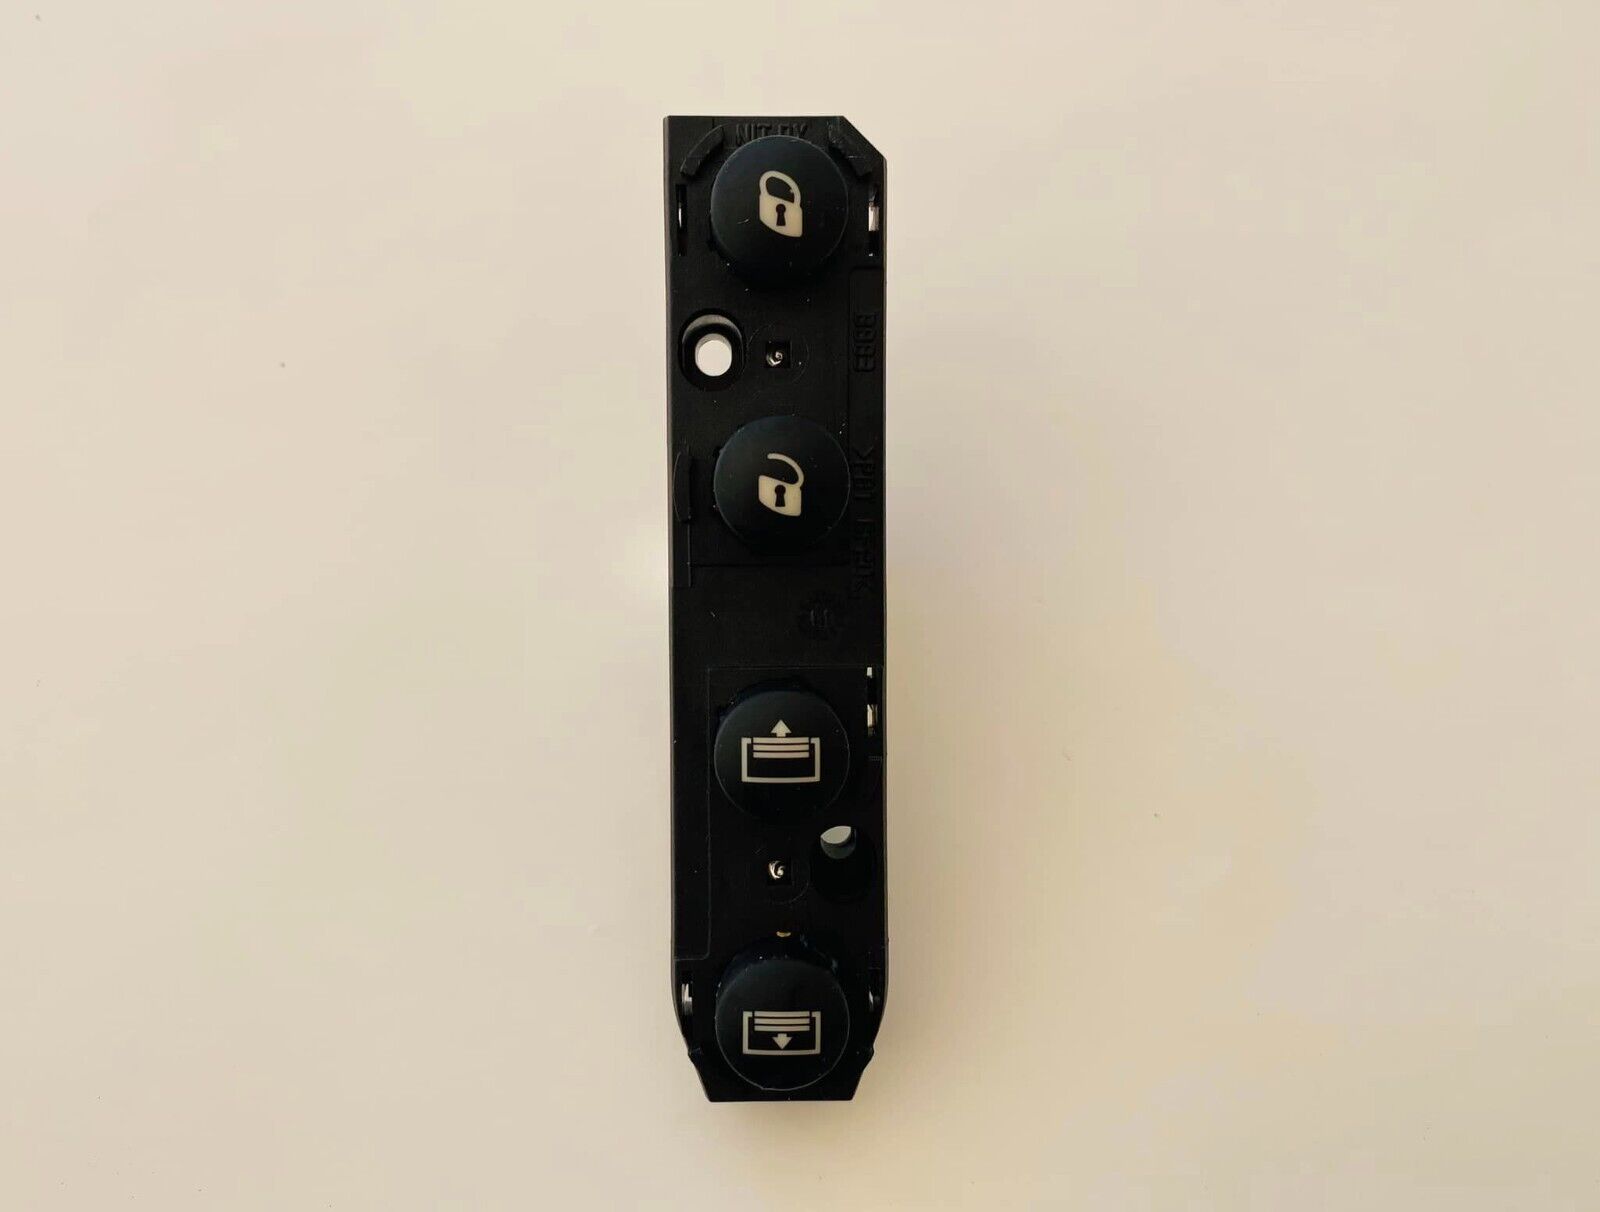 NEW OEM Window Switch Control Buttons for 2003 - 2012 Maserati Quattroporte